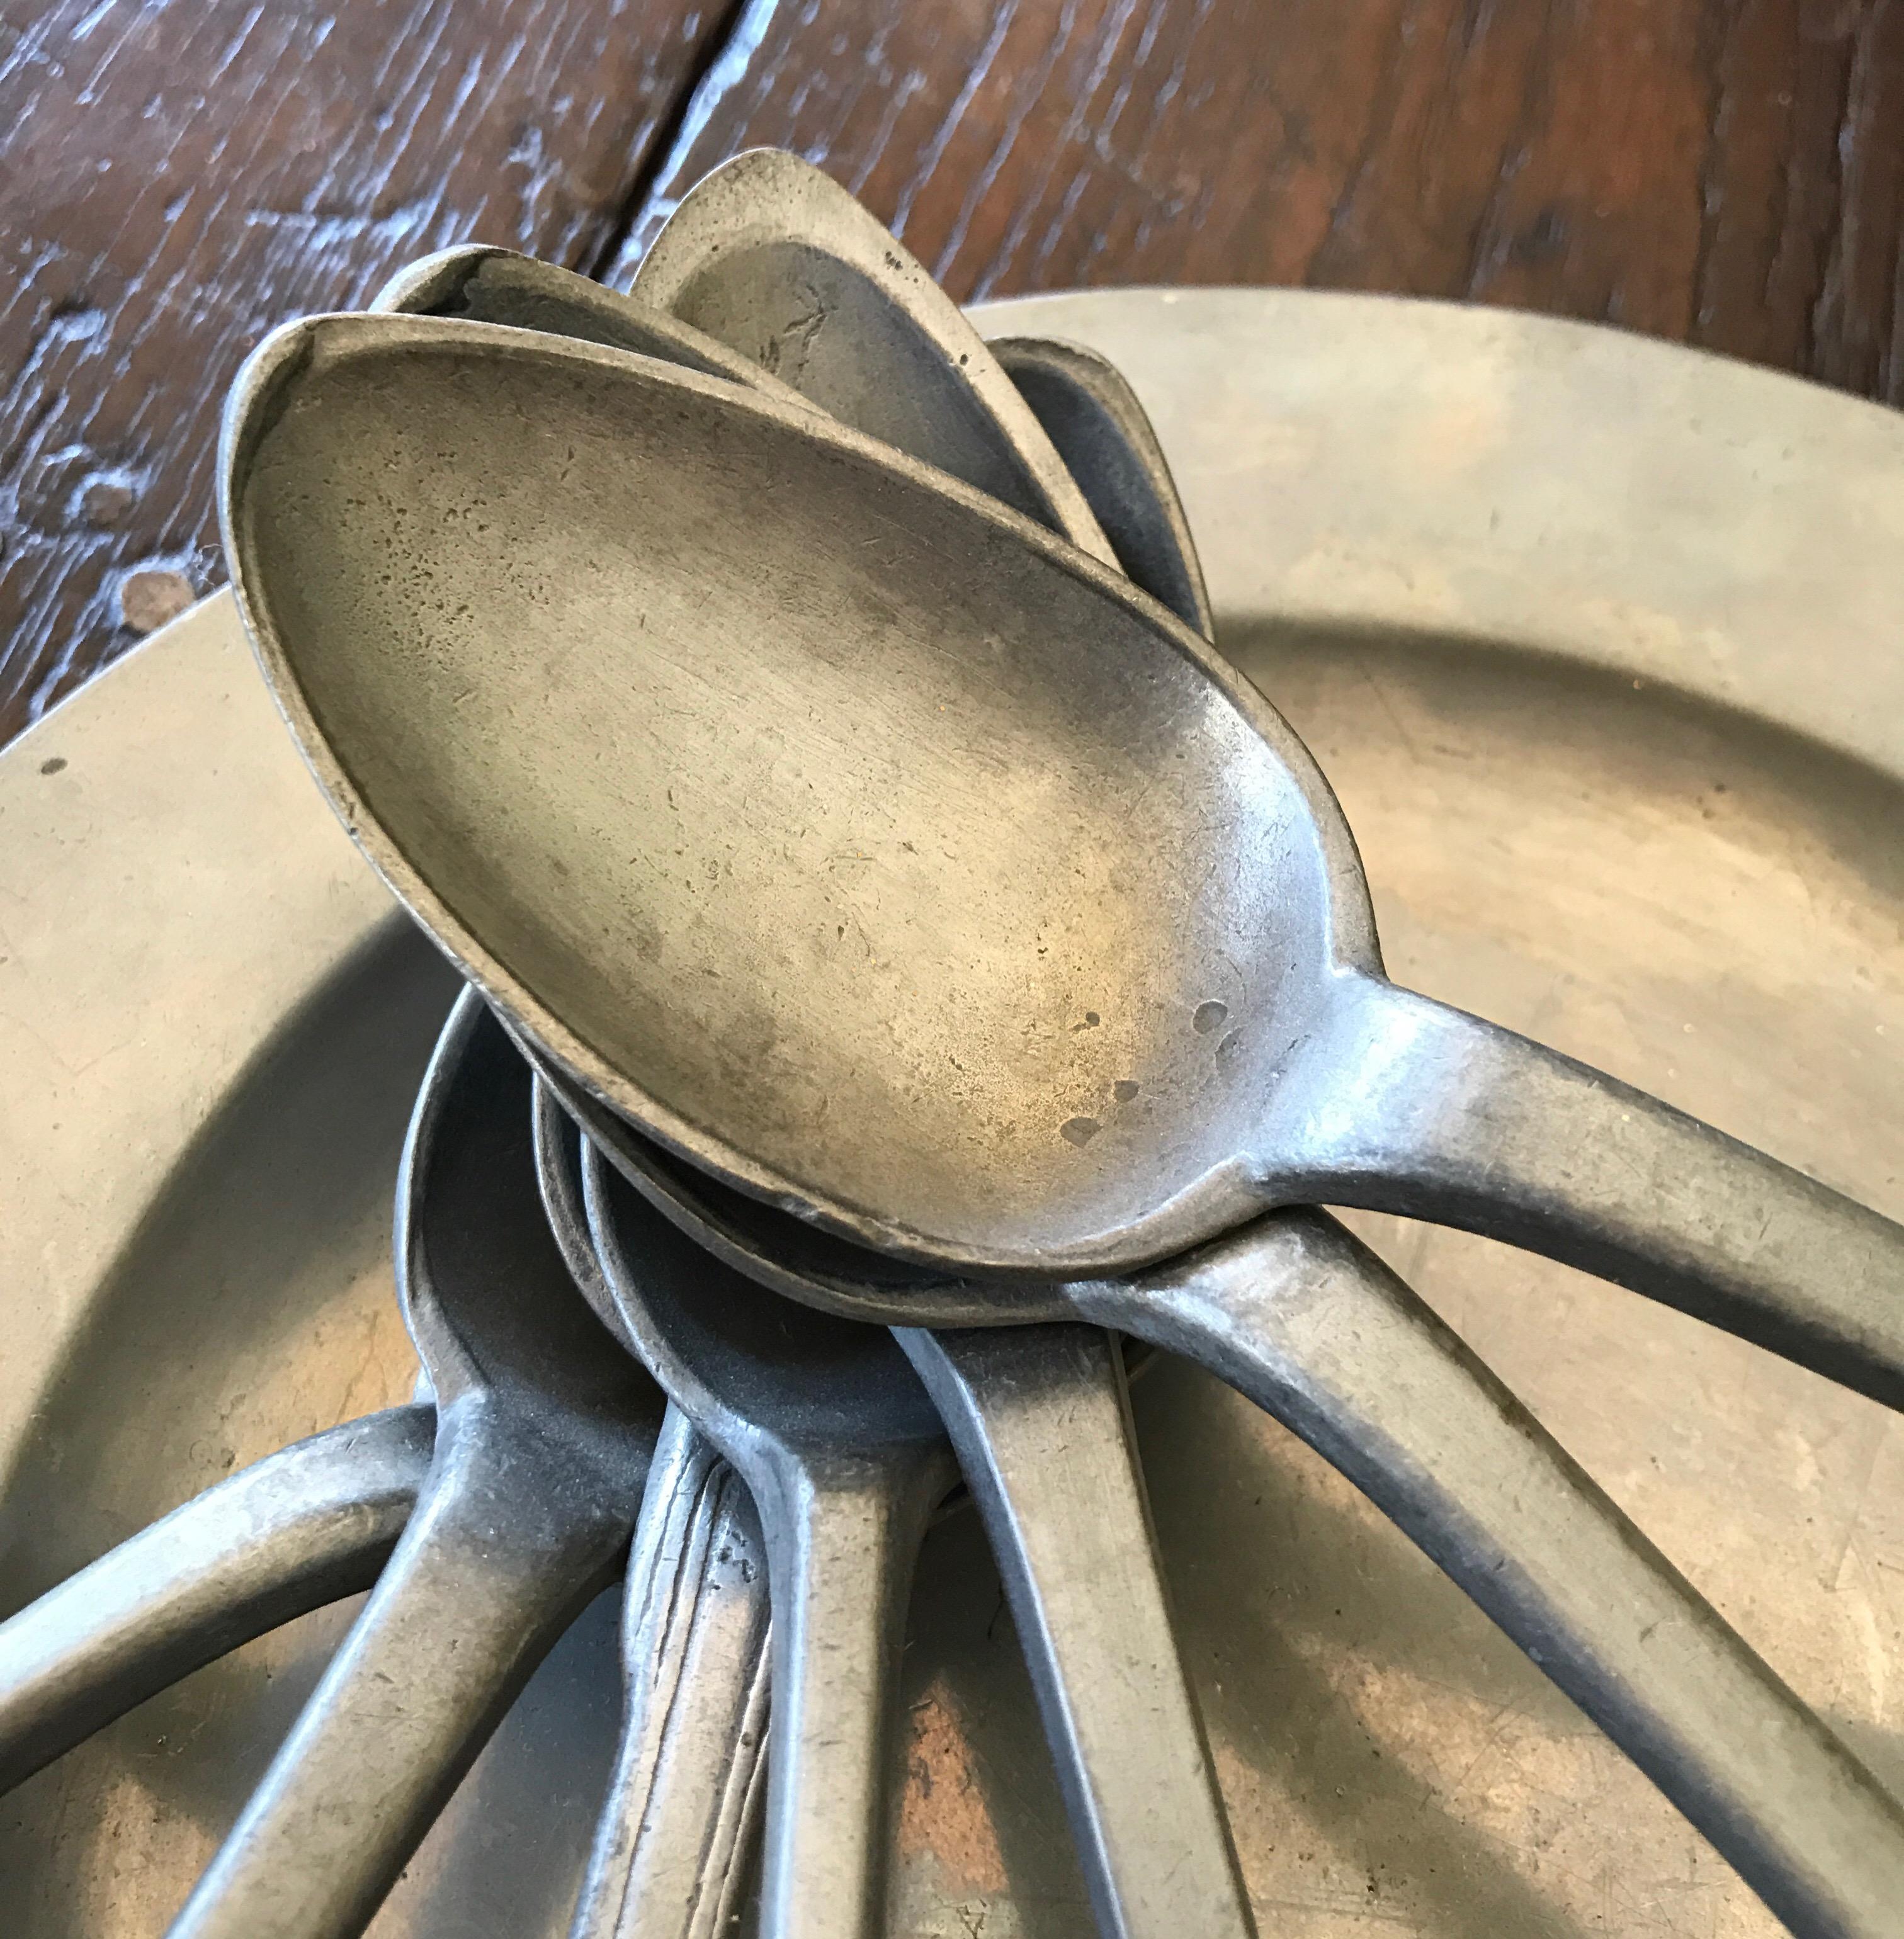 Plate London in pewter 24 cm
7 spoons in pewter
19th century.